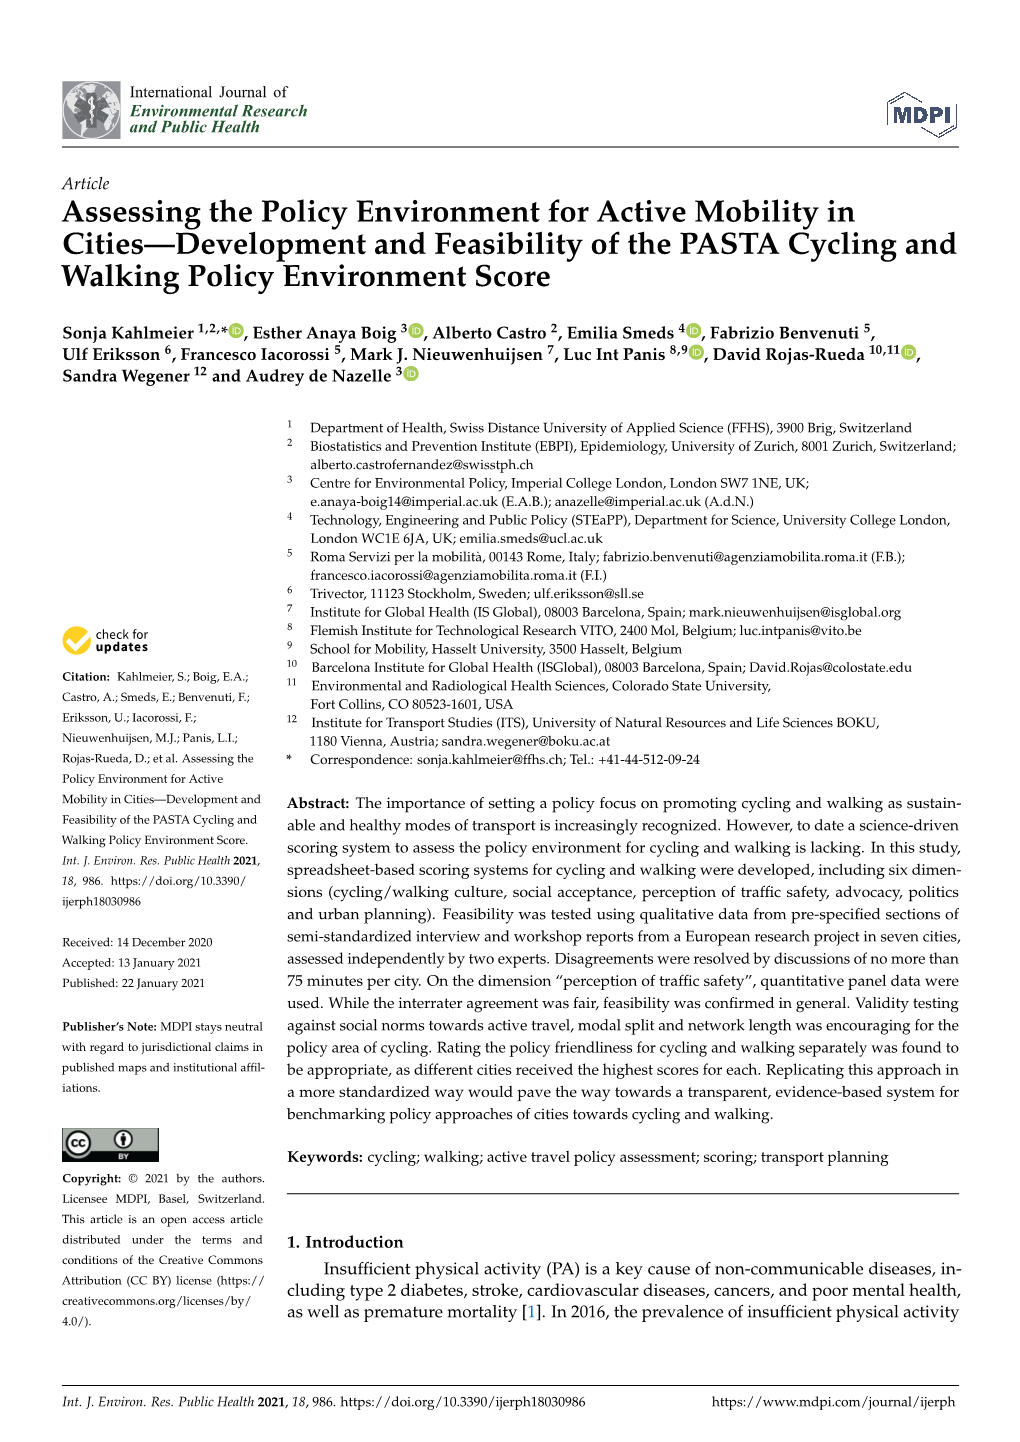 Assessing the Policy Environment for Active Mobility in Cities—Development and Feasibility of the PASTA Cycling and Walking Policy Environment Score